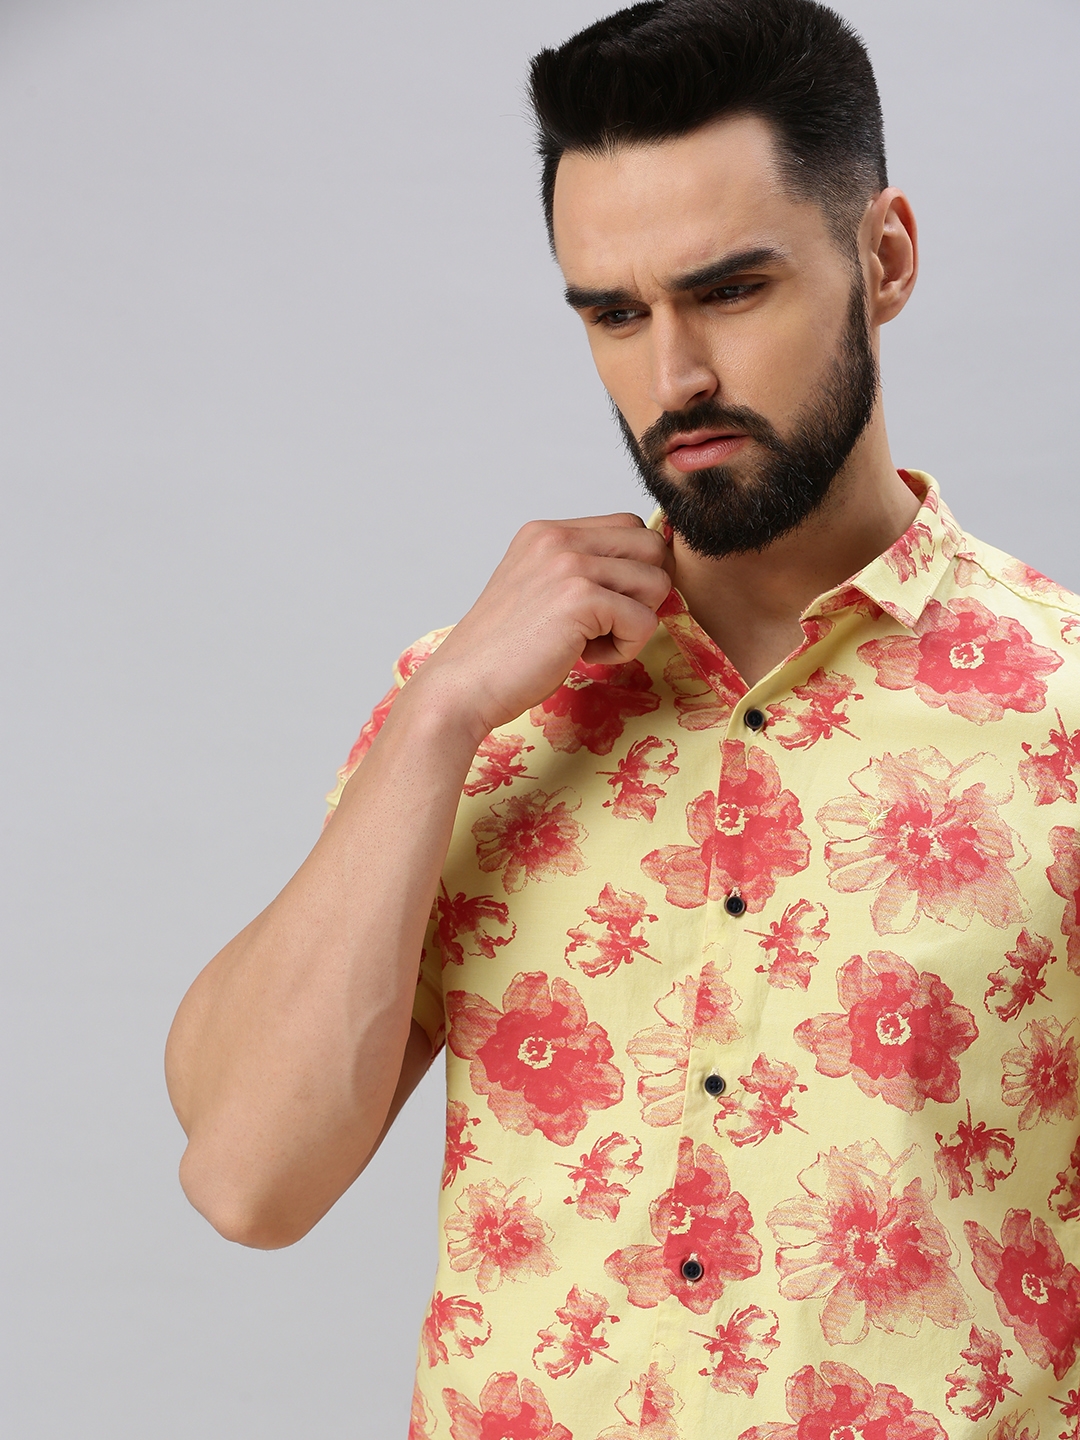 Showoff | SHOWOFF Men's Roll-Up Sleeves Yellow Floral Shirts